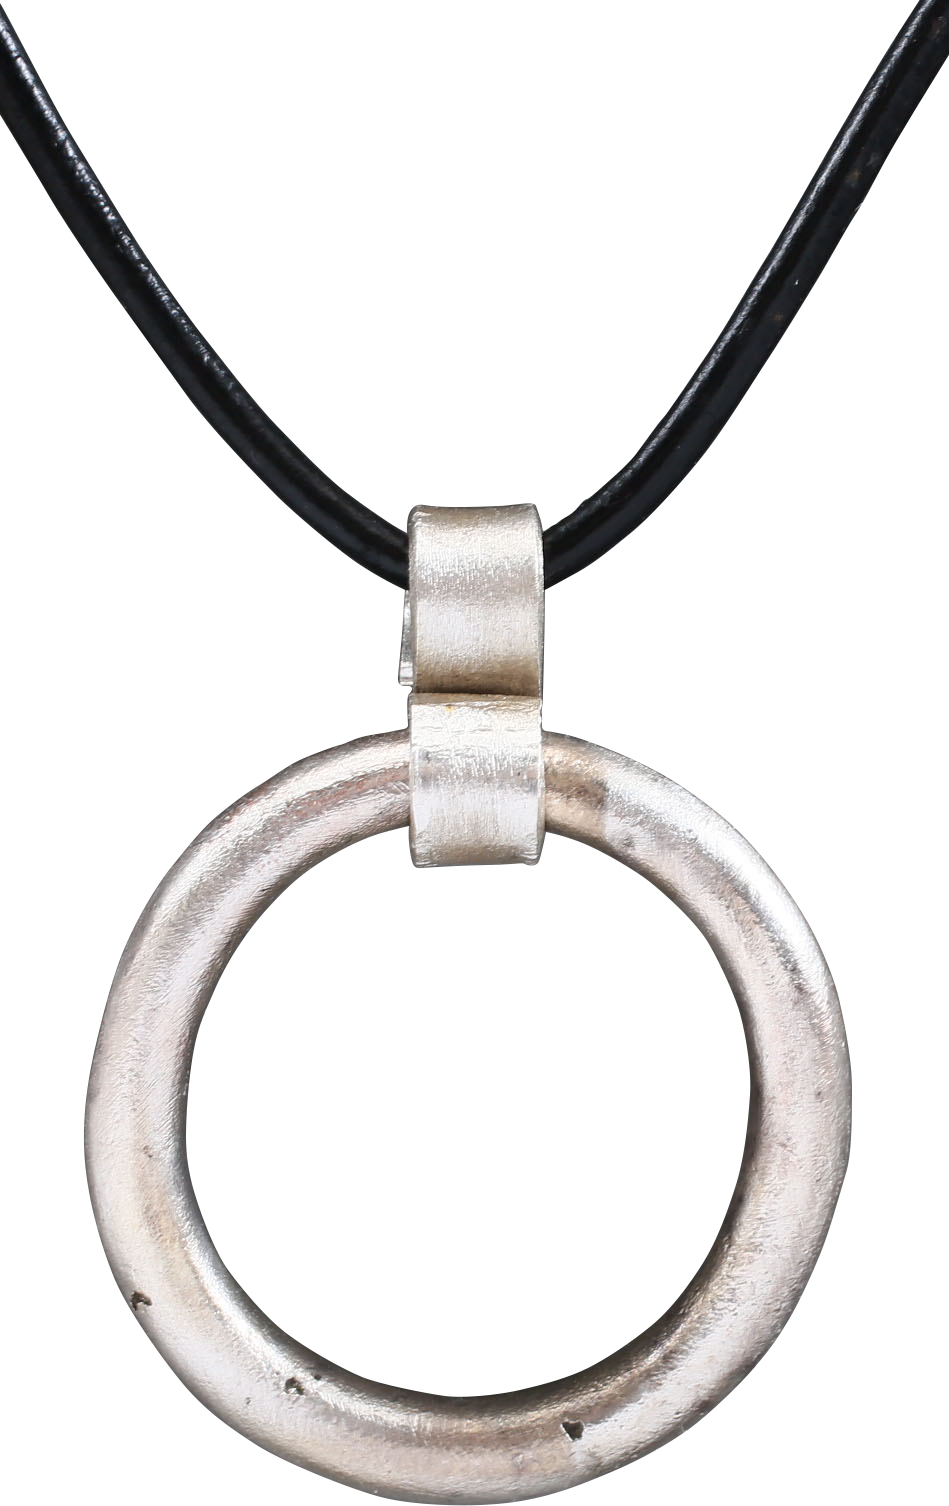 CELTIC PROSPERITY RING NECKLACE, C.400-100 BC - Fagan Arms (8202639802542)